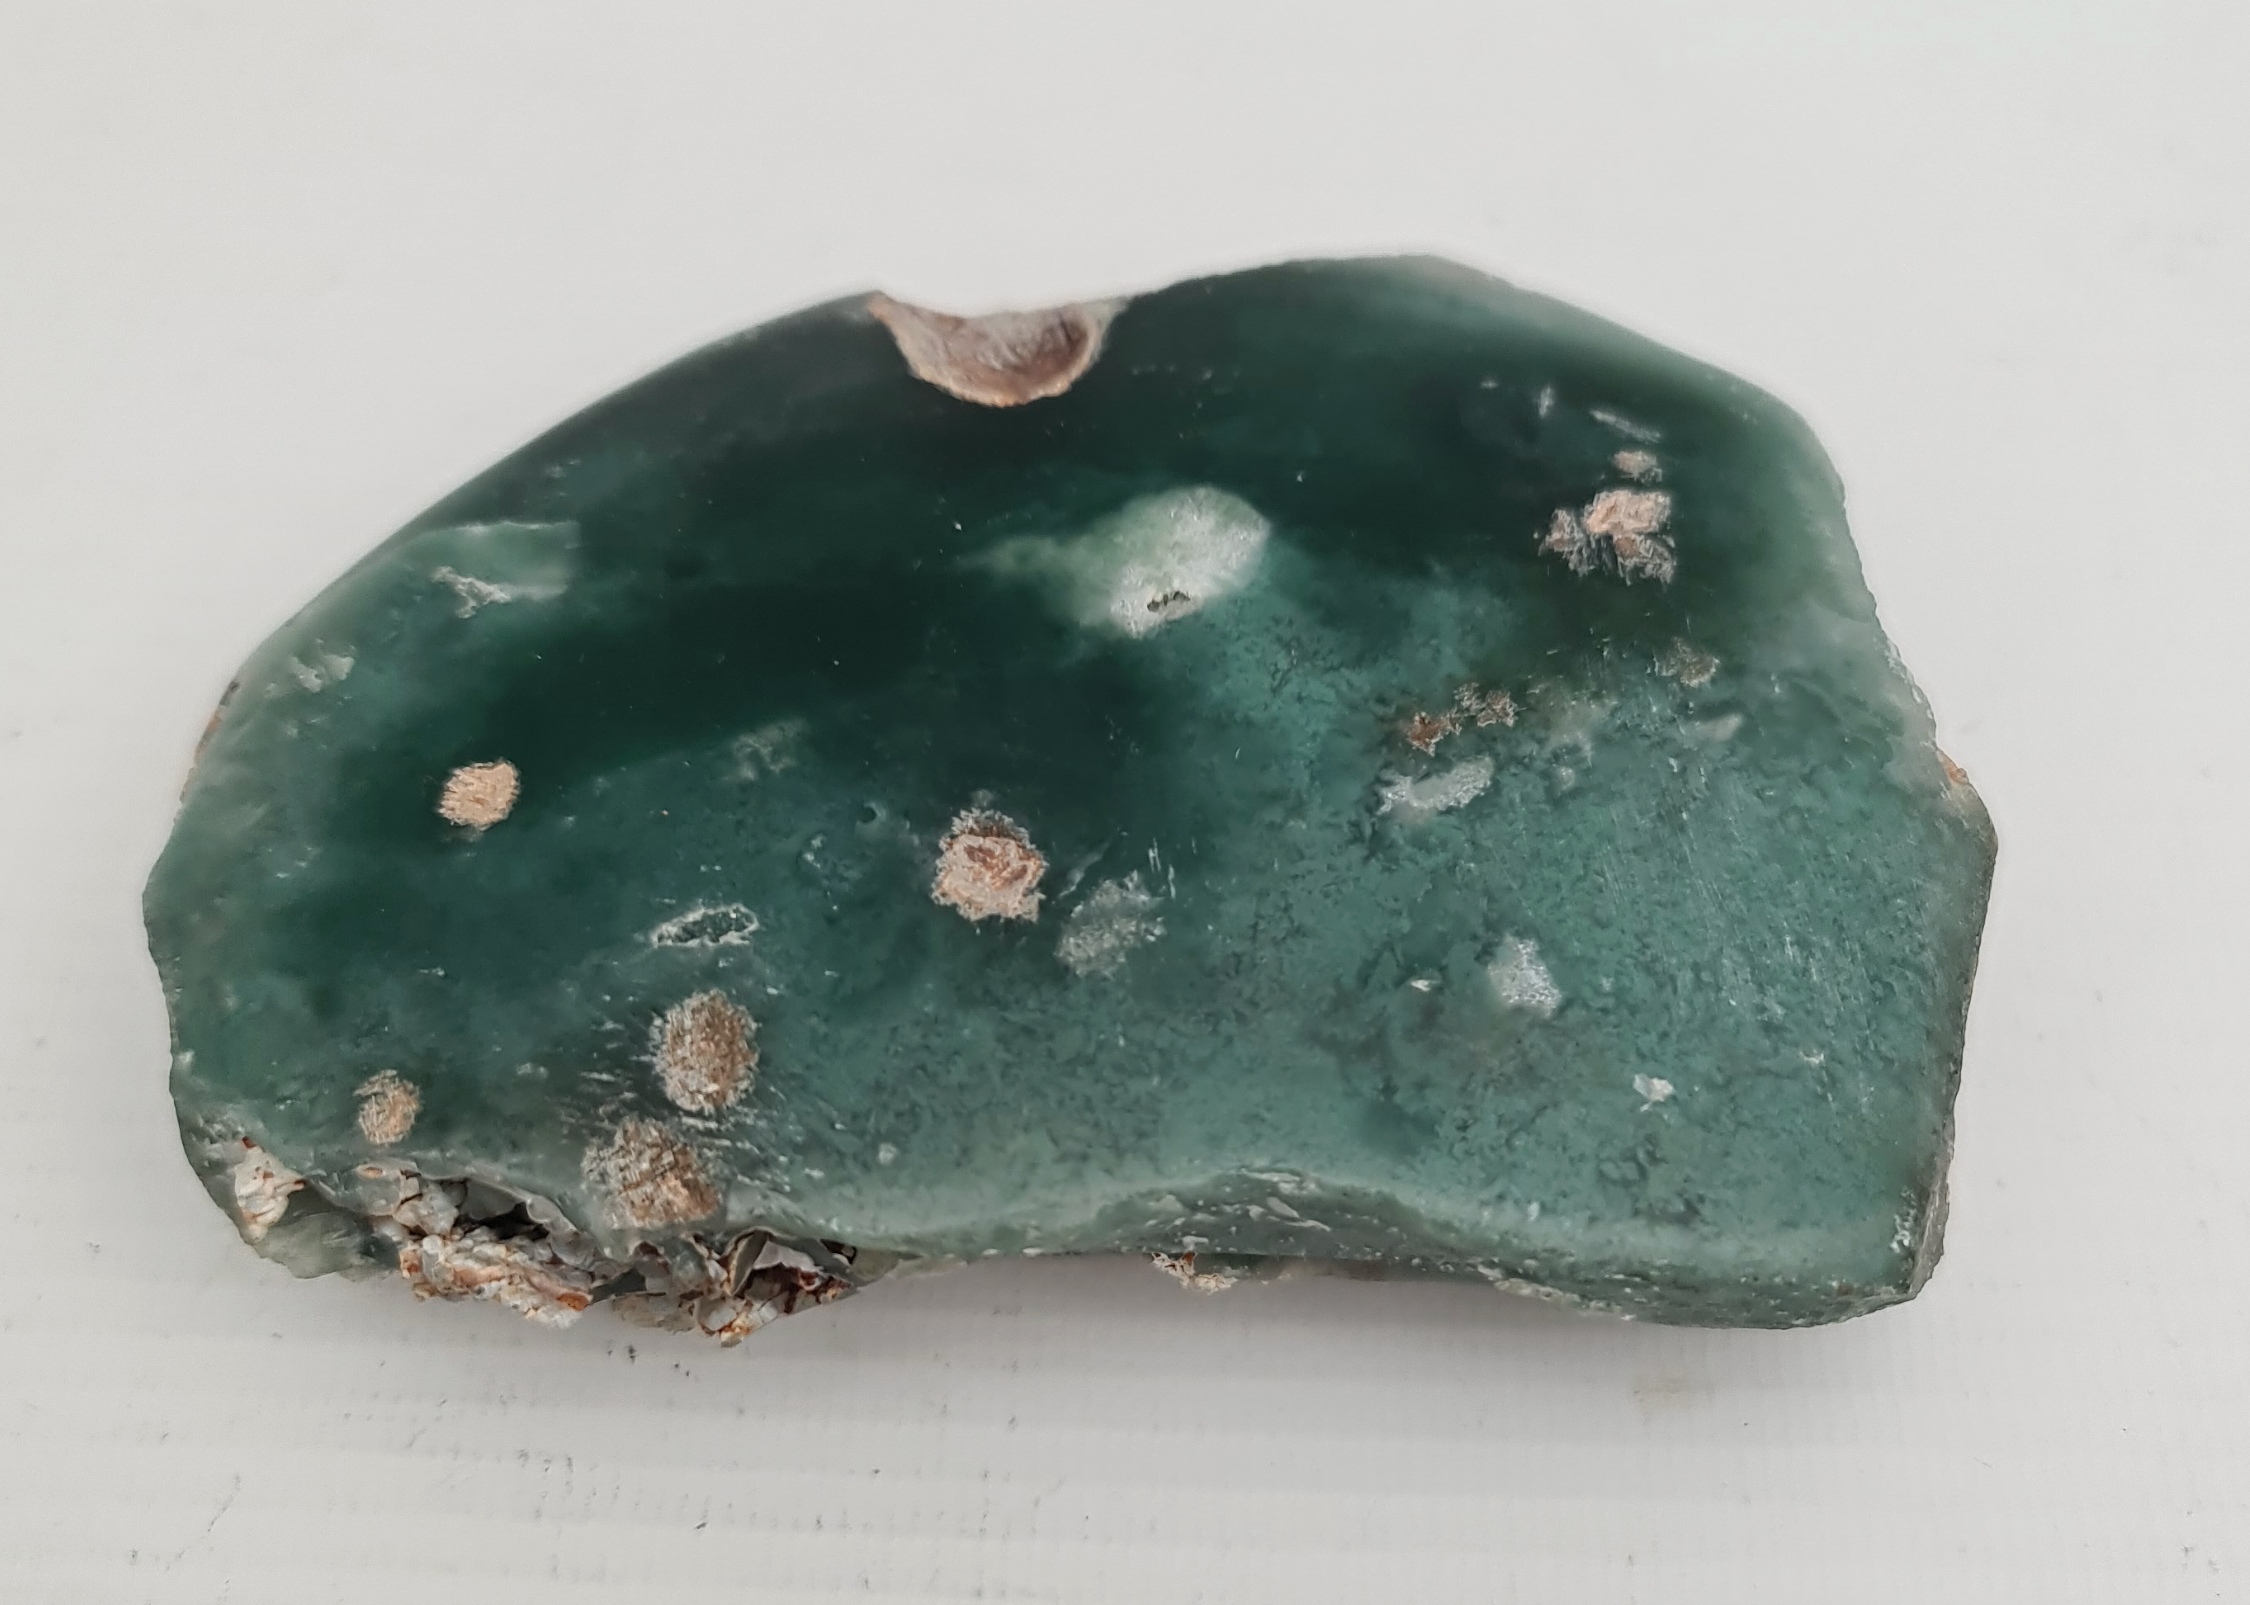 Collectable Minerals Jadeite Weight 312g. Measures 4.5 inches wide by 3.25 inches